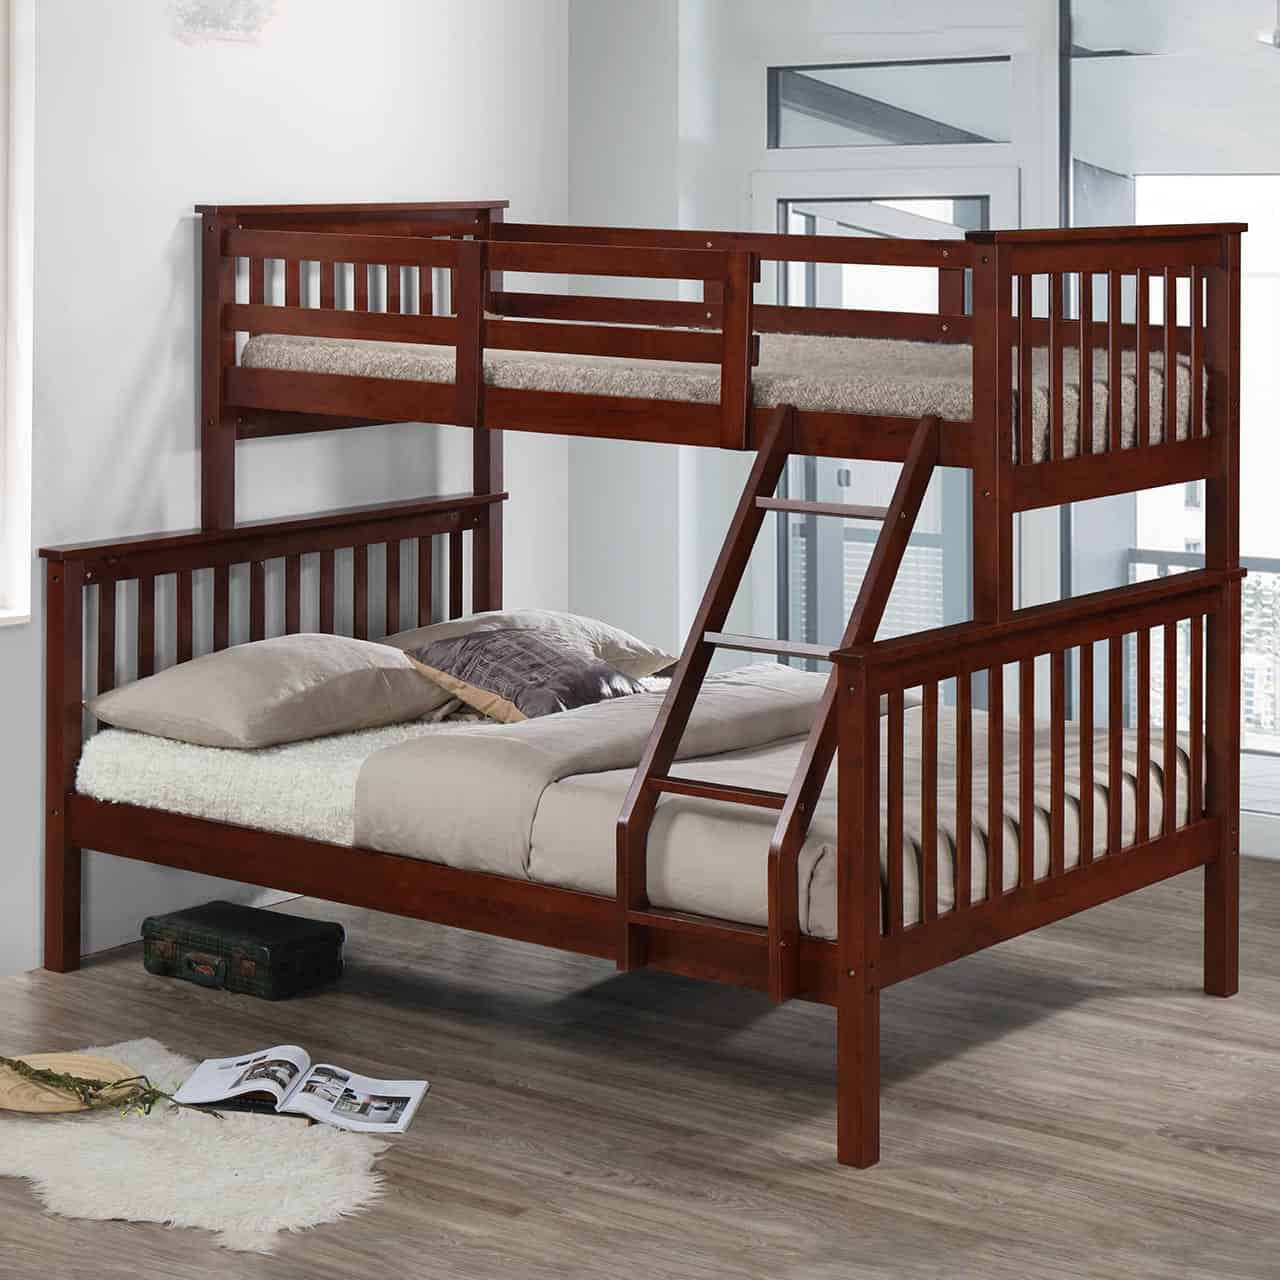 Tri Wooden Bunk Bed